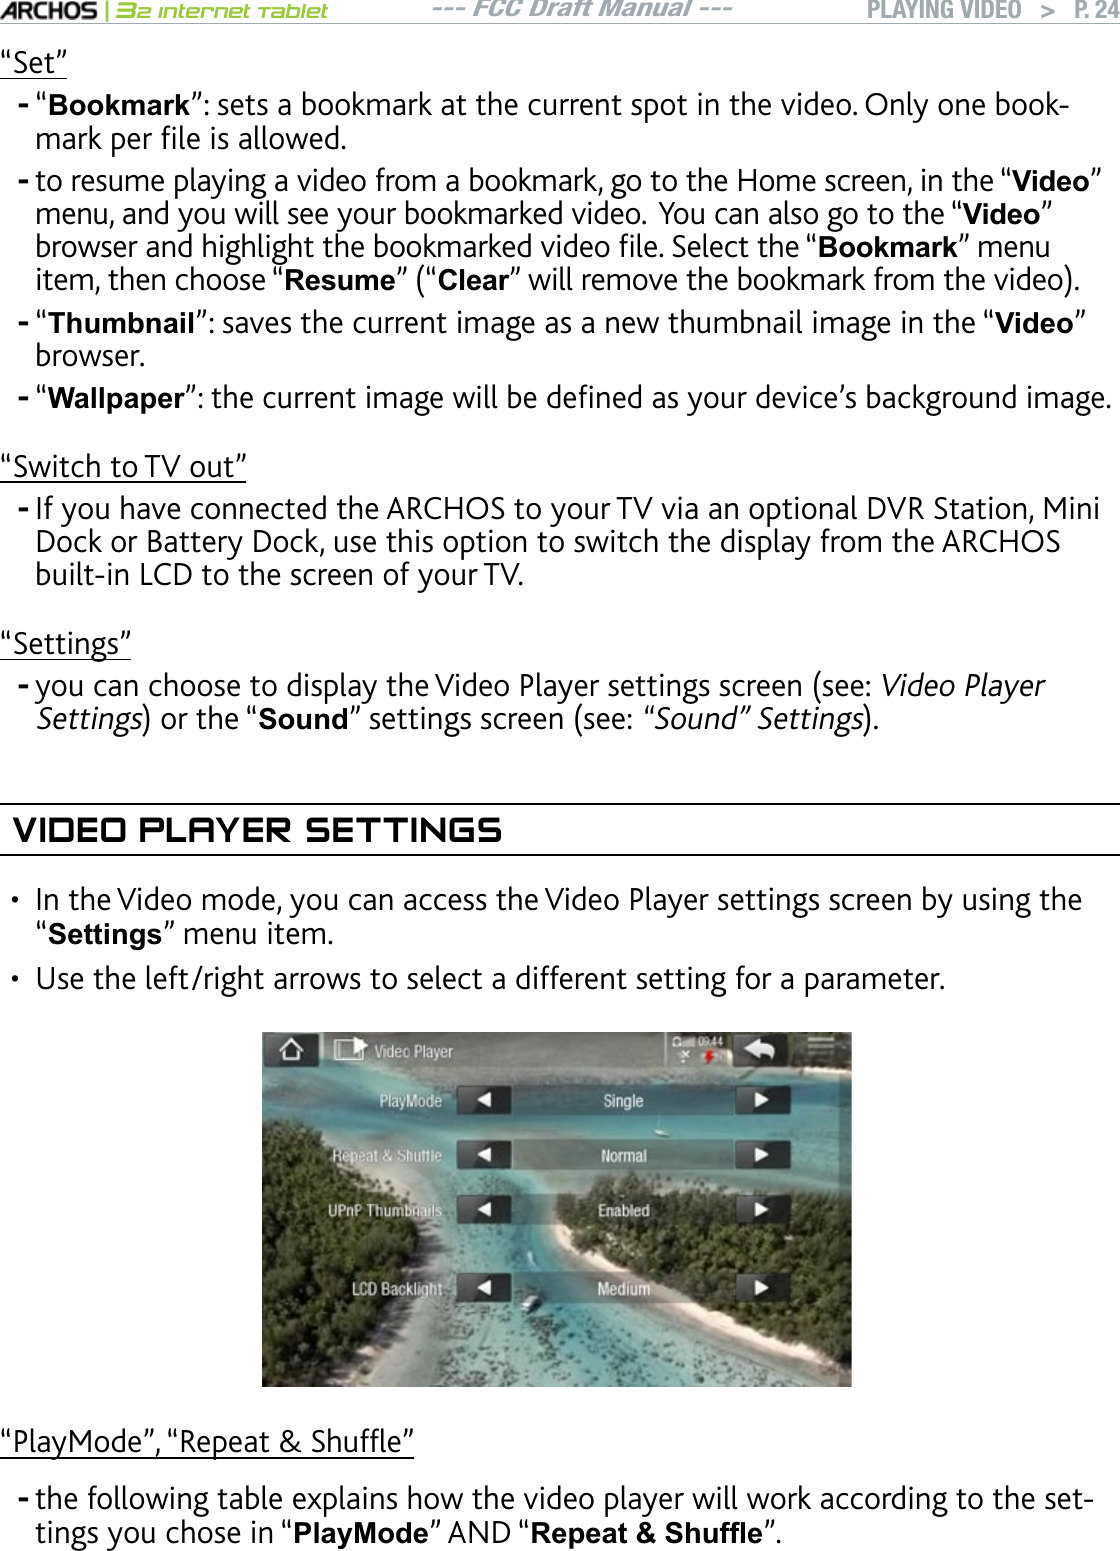 --- FCC Draft Manual ---|32 Internet TabletPLAYING VIDEO   &gt; P. 24“Set”“Bookmark”: sets a bookmark at the current spot in the video. Only one bookOCTMRGTÒNGKUCNNQYGFto resume playing a video from a bookmark, go to the Home screen, in the “Video” menu, and you will see your bookmarked video.  You can also go to the “Video” DTQYUGTCPFJKIJNKIJVVJGDQQMOCTMGFXKFGQÒNG5GNGEVVJGmBookmark” menu item, then choose “ResumenmClearnYKNNTGOQXGVJGDQQMOCTMHTQOVJGXKFGQ“7KXPEQDLO”: saves the current image as a new thumbnail image in the “Video” browser.“WallpapernVJGEWTTGPVKOCIGYKNNDGFGÒPGFCU[QWTFGXKEGlUDCEMITQWPFKOCIG“Switch to TV out”+H[QWJCXGEQPPGEVGFVJG#4%*15VQ[QWT68XKCCPQRVKQPCN&amp;845VCVKQP/KPKDock or Battery Dock, use this option to switch the display from the ARCHOS DWKNVKP.%&amp;VQVJGUETGGPQH[QWT68“Settings”[QWECPEJQQUGVQFKURNC[VJG8KFGQ2NC[GTUGVVKPIUUETGGPUGGVideo Player SettingsQTVJGmSoundnUGVVKPIUUETGGPUGG“Sound” SettingsVIDEO PLAYER SETTINGS+PVJG8KFGQOQFG[QWECPCEEGUUVJG8KFGQ2NC[GTUGVVKPIUUETGGPD[WUKPIVJG“Settings” menu item.Use the left/right arrows to select a different setting for a parameter.m2NC[/QFGnm4GRGCV5JWHÓGnthe following table explains how the video player will work according to the settings you chose in “PlayMode” AND “5HSHDW6KXIÀH”.------••-